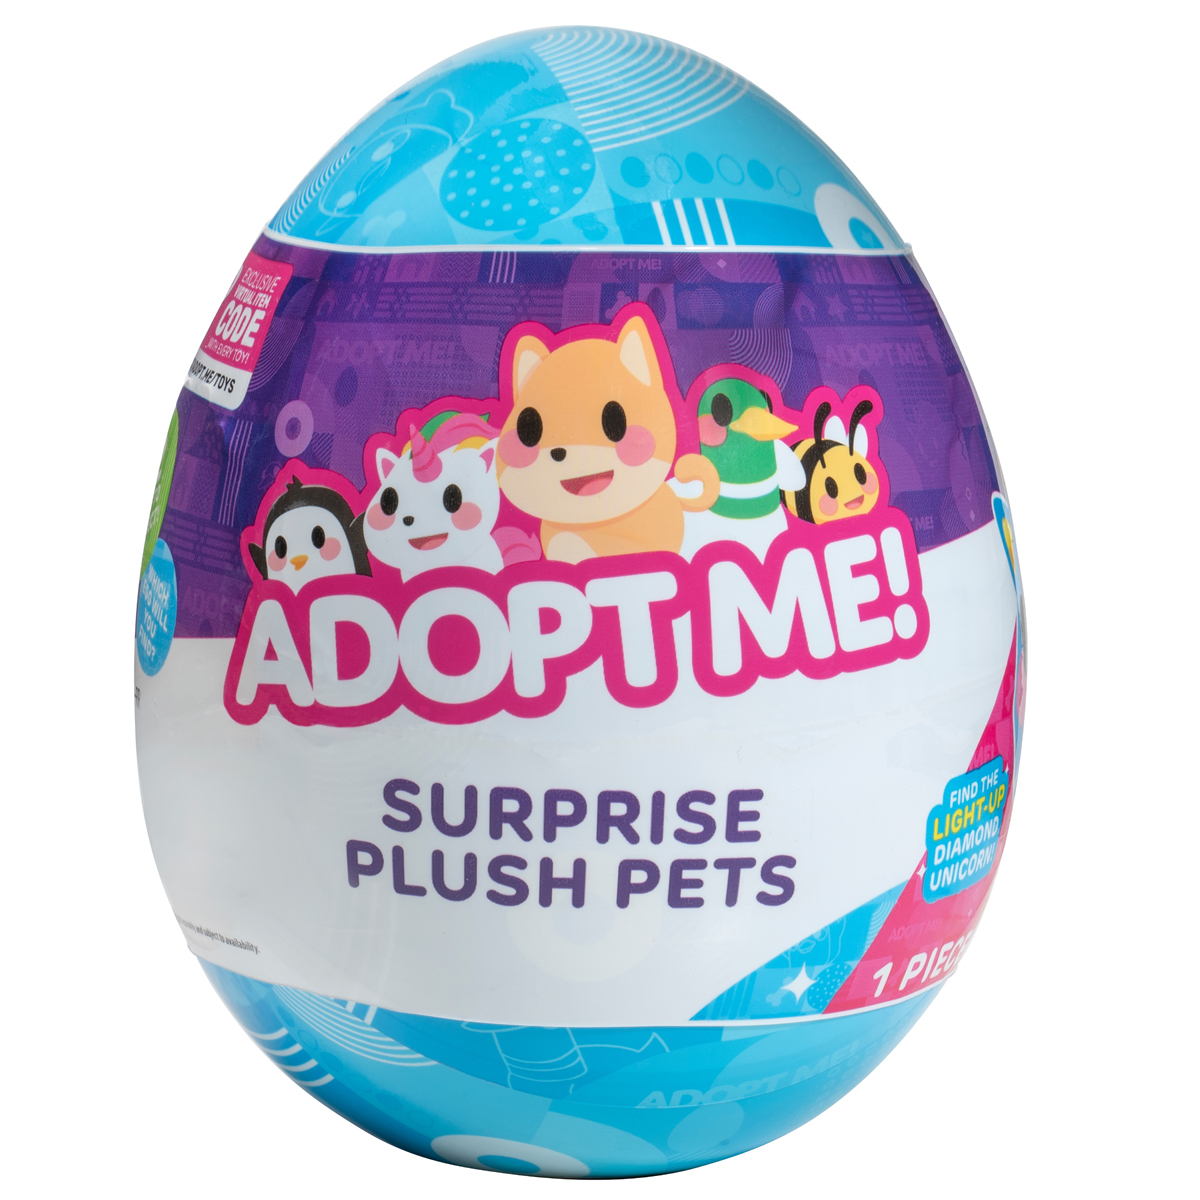 star pets in adopt me